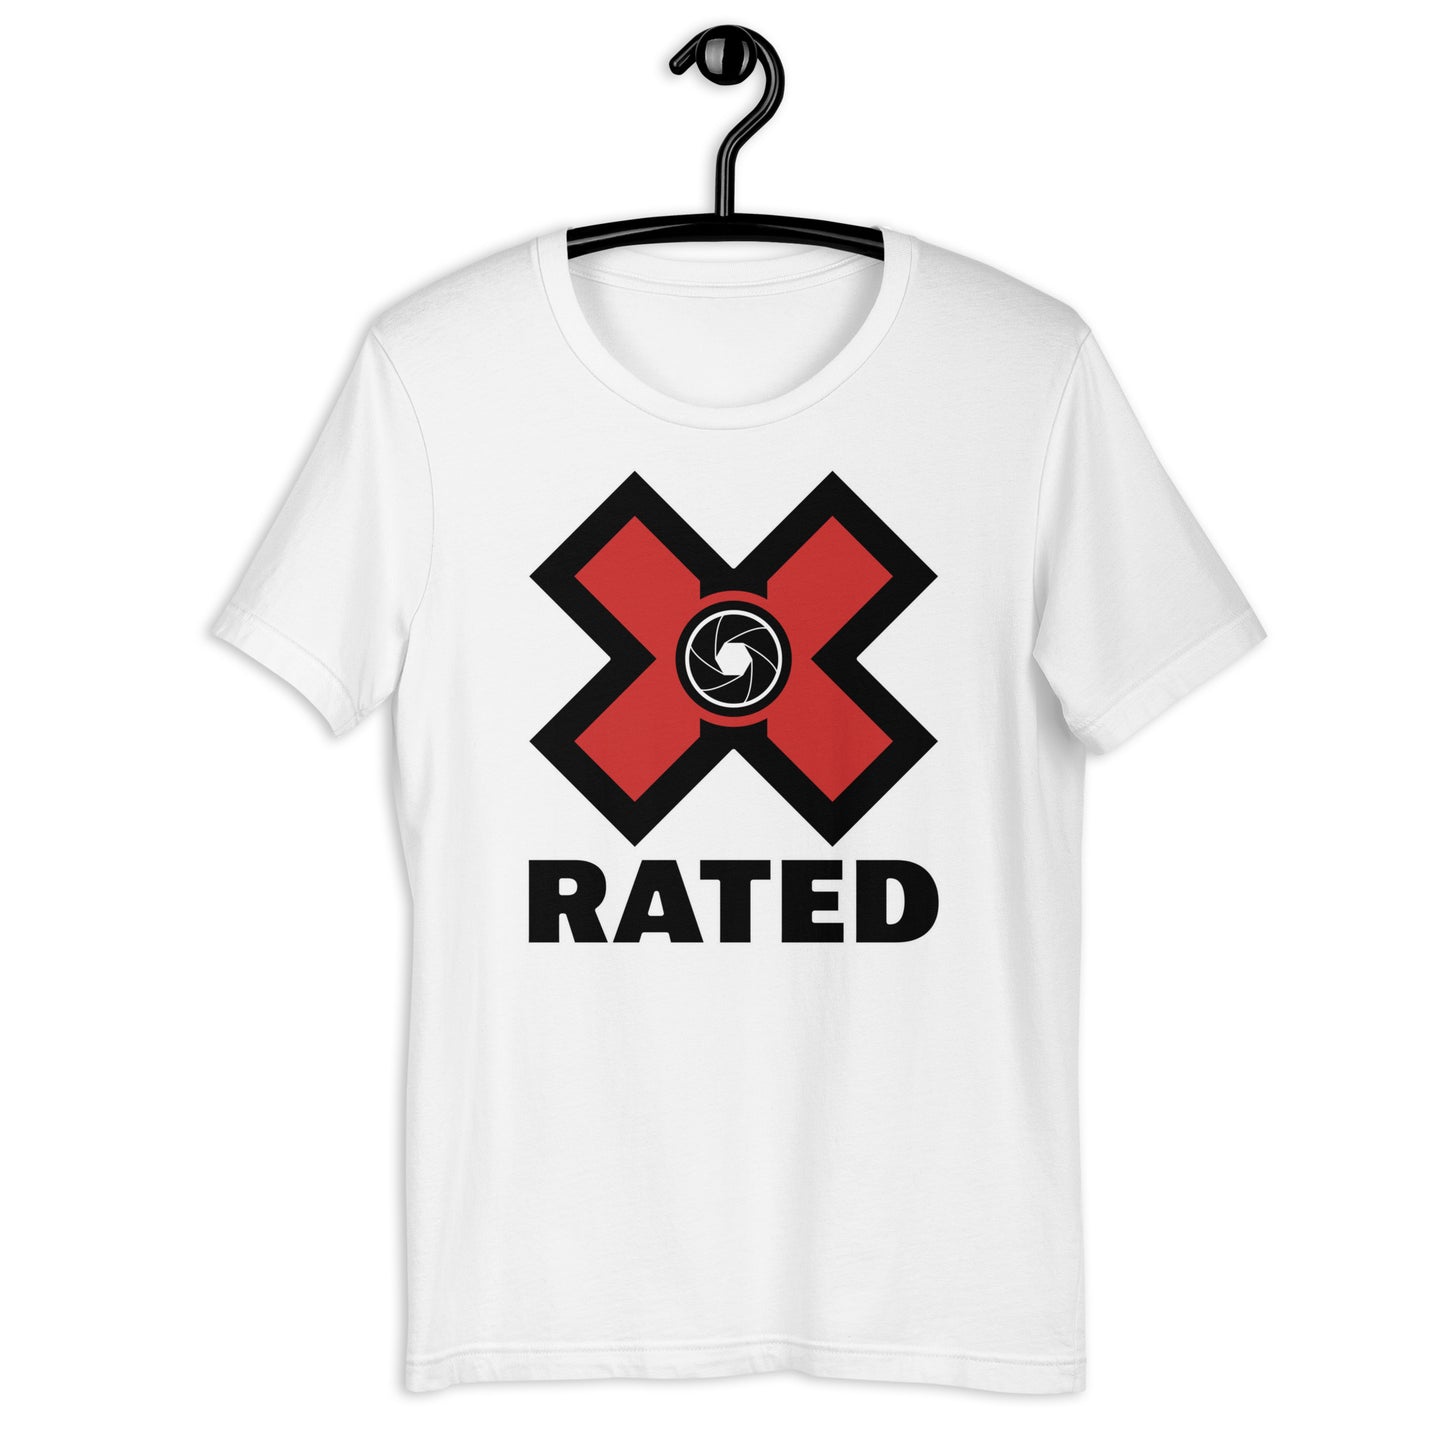 Tainted Goods X-RATED Tee